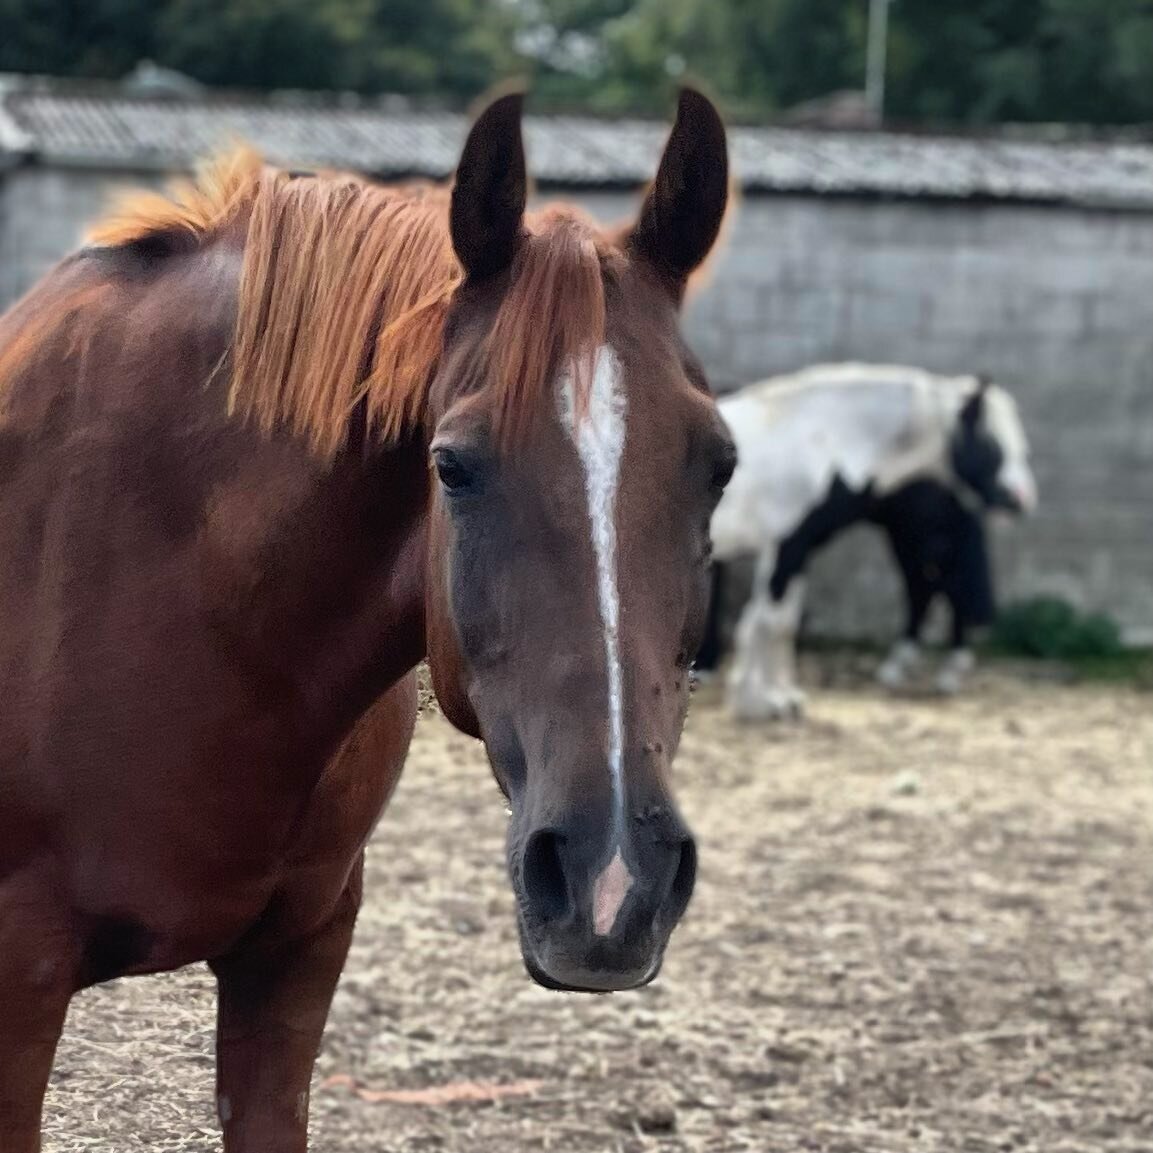 ⭐️ 𝐈𝐧𝐭𝐫𝐨𝐝𝐮𝐜𝐢𝐧𝐠 . . . Sam! A cute face and when ridden- lovely and forward going! he&rsquo;s sweet and loves a fuss and a treat! ⭐️ #pony#riding#horse#horse-riding#ukridingschool#britishridingschool#ridinglesson#ponies#birtlesequestrian#rid